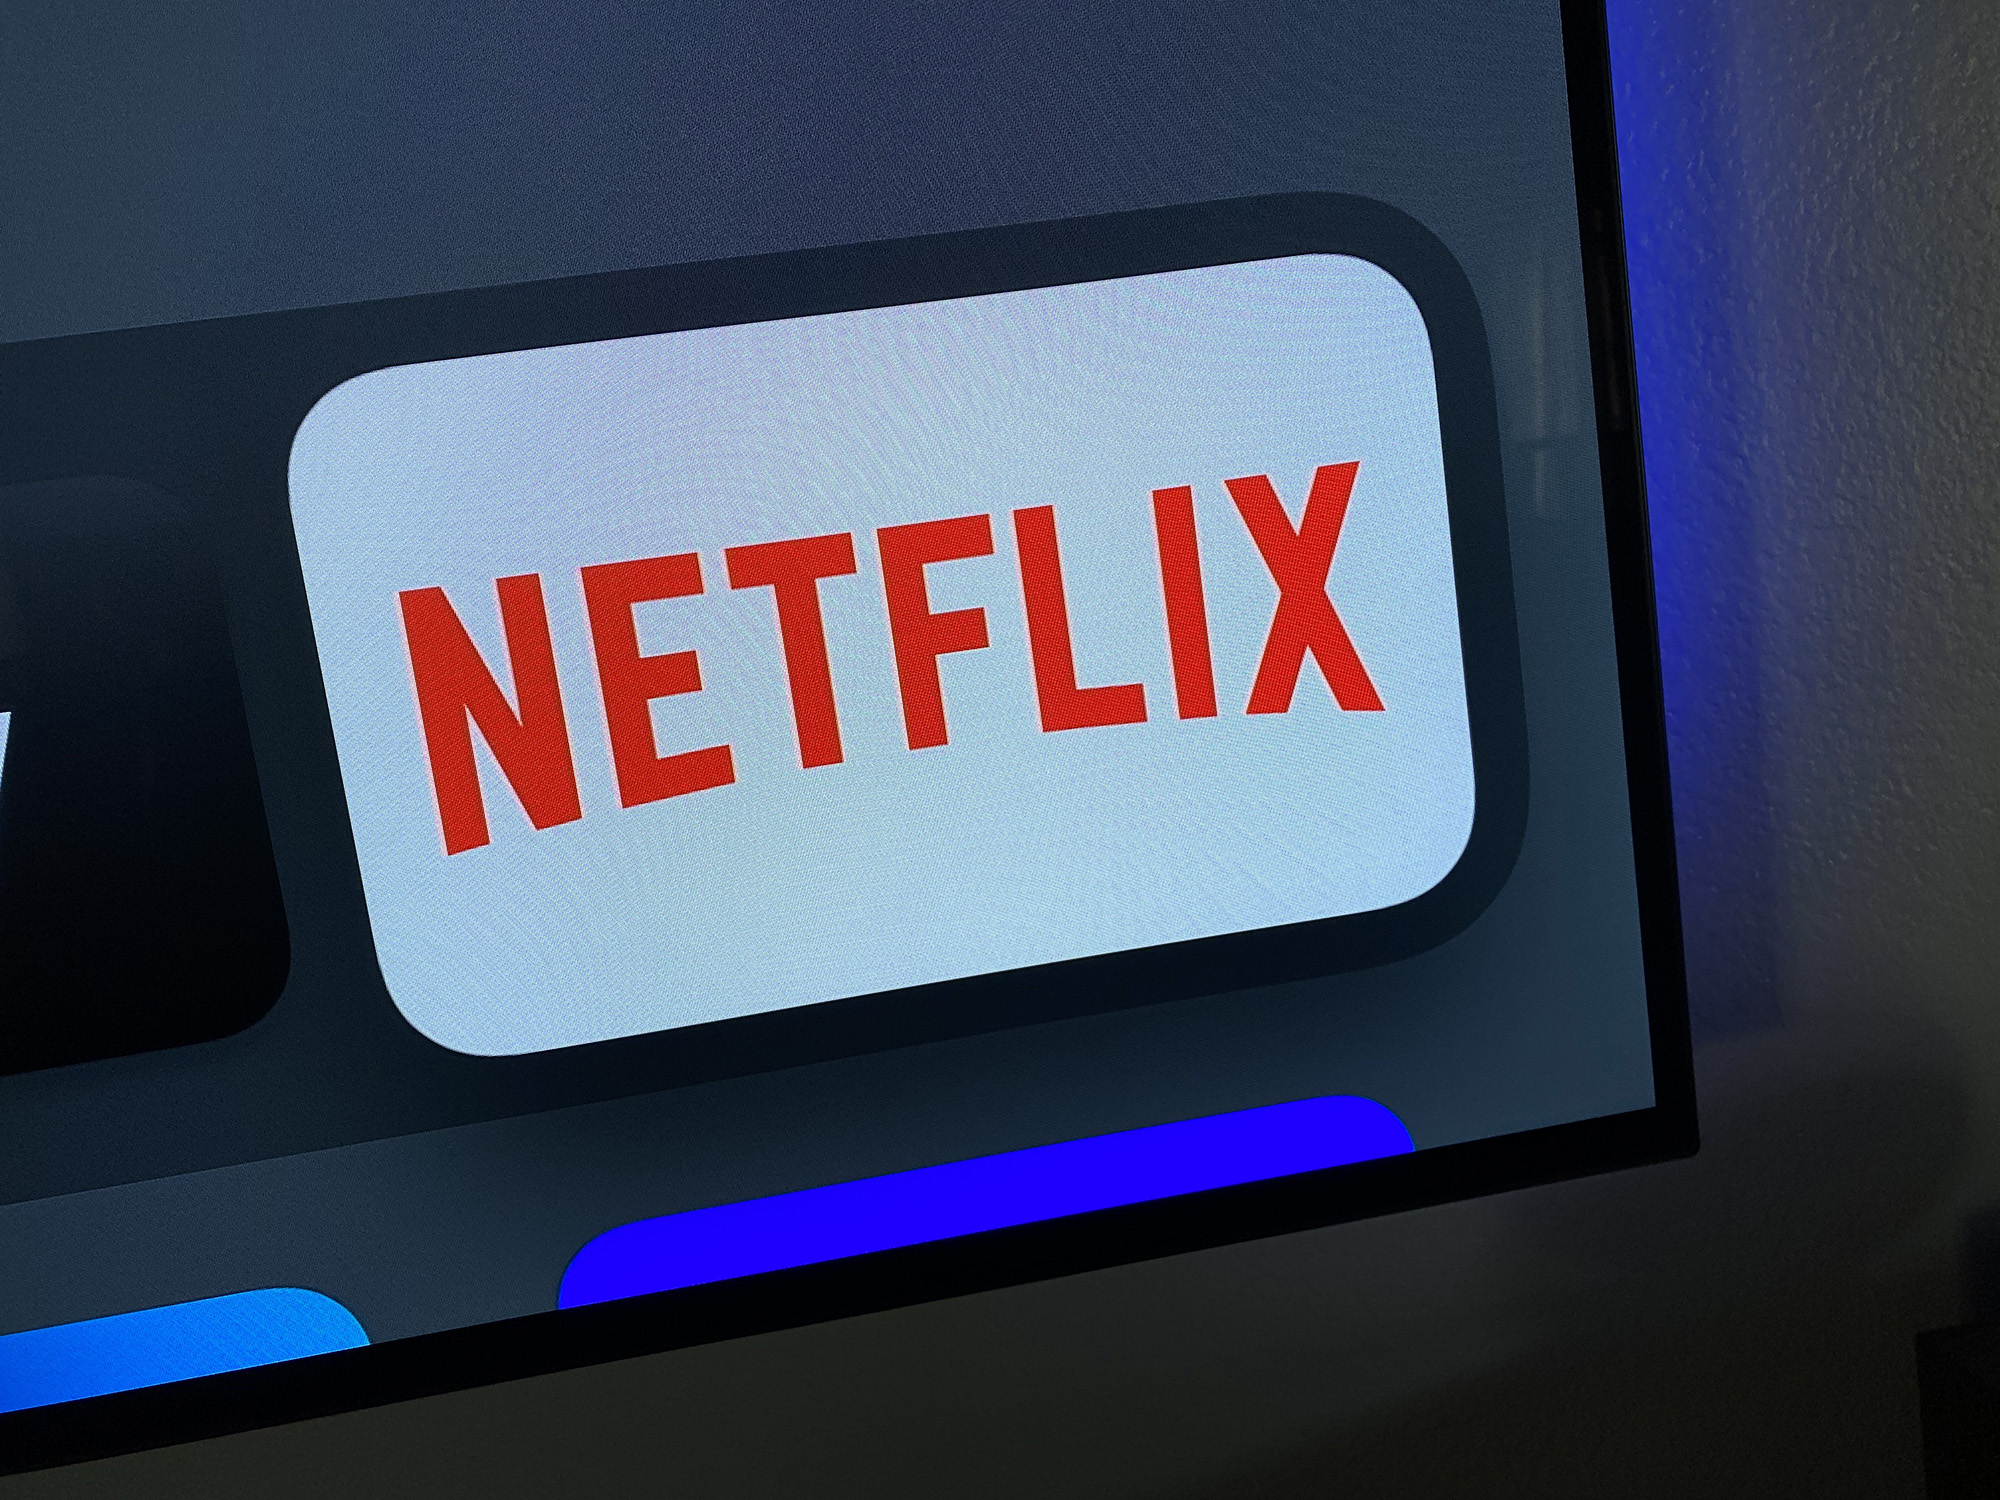 Netflix to crack down on password sharing from early 2023